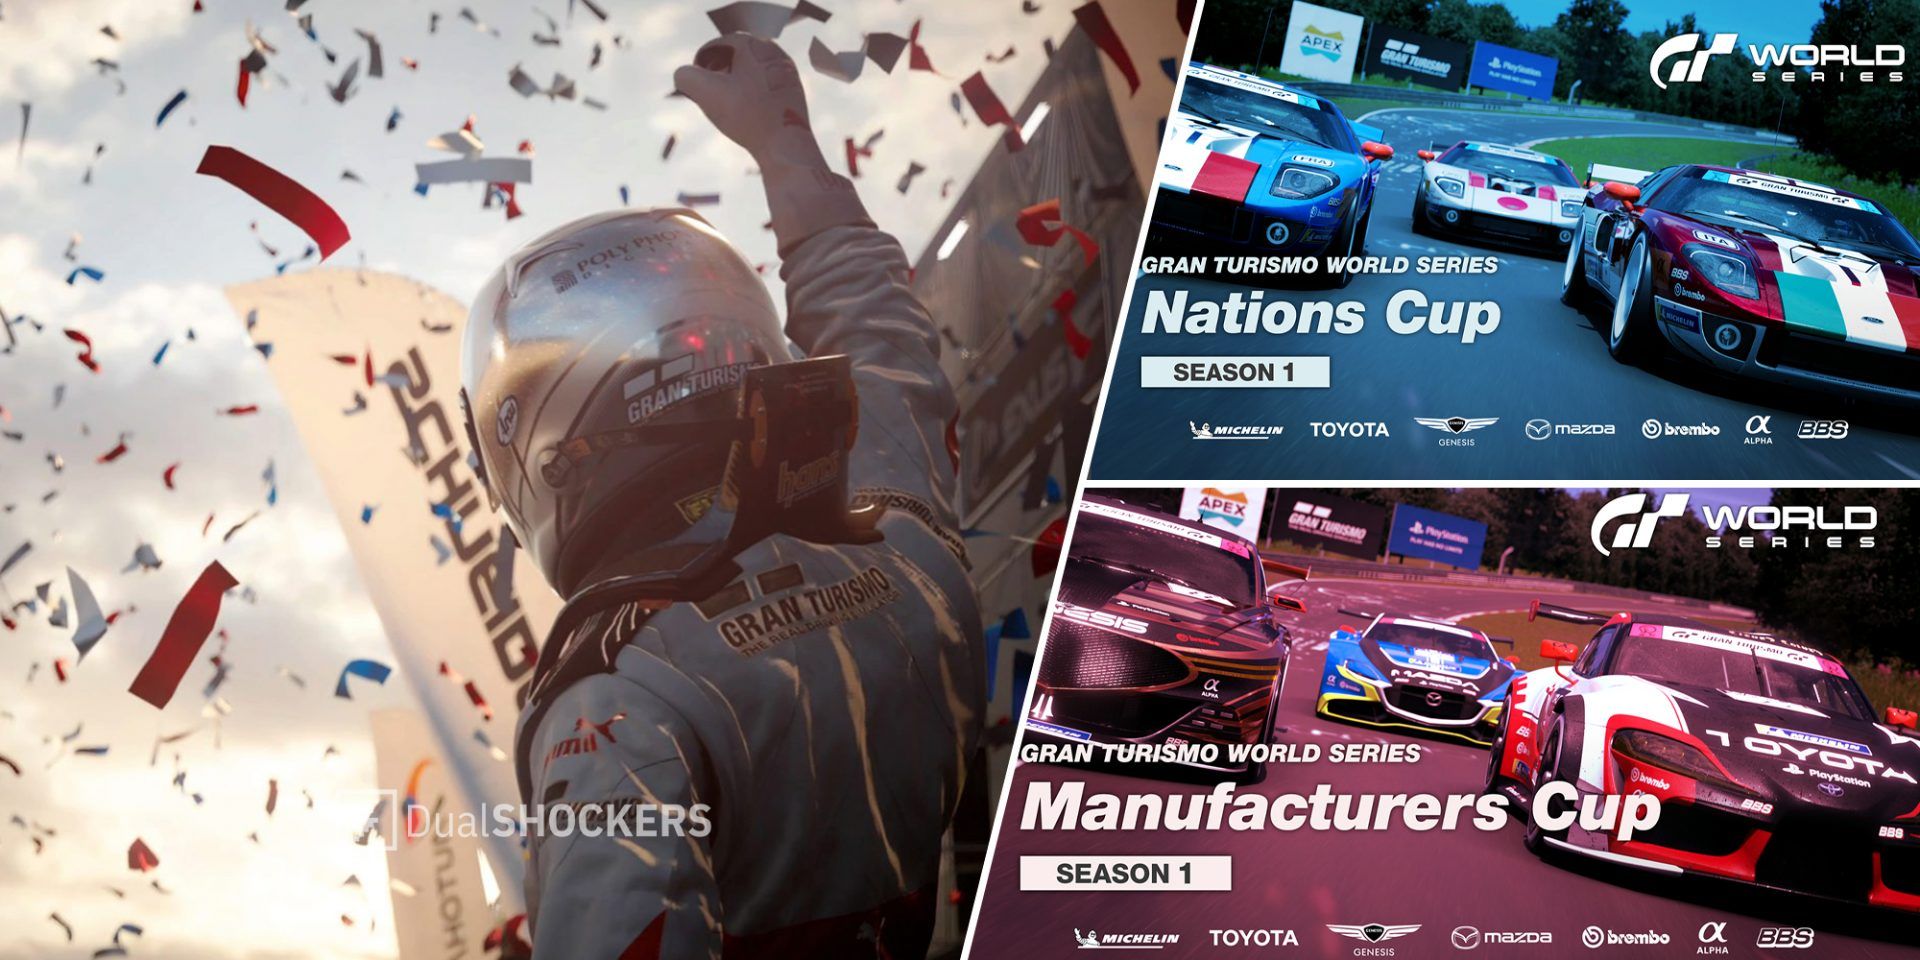 Gran Turismo World Series 2022 Showdown celebration on left, Nations Cup on top right, Manufacturers Cup on bottom right